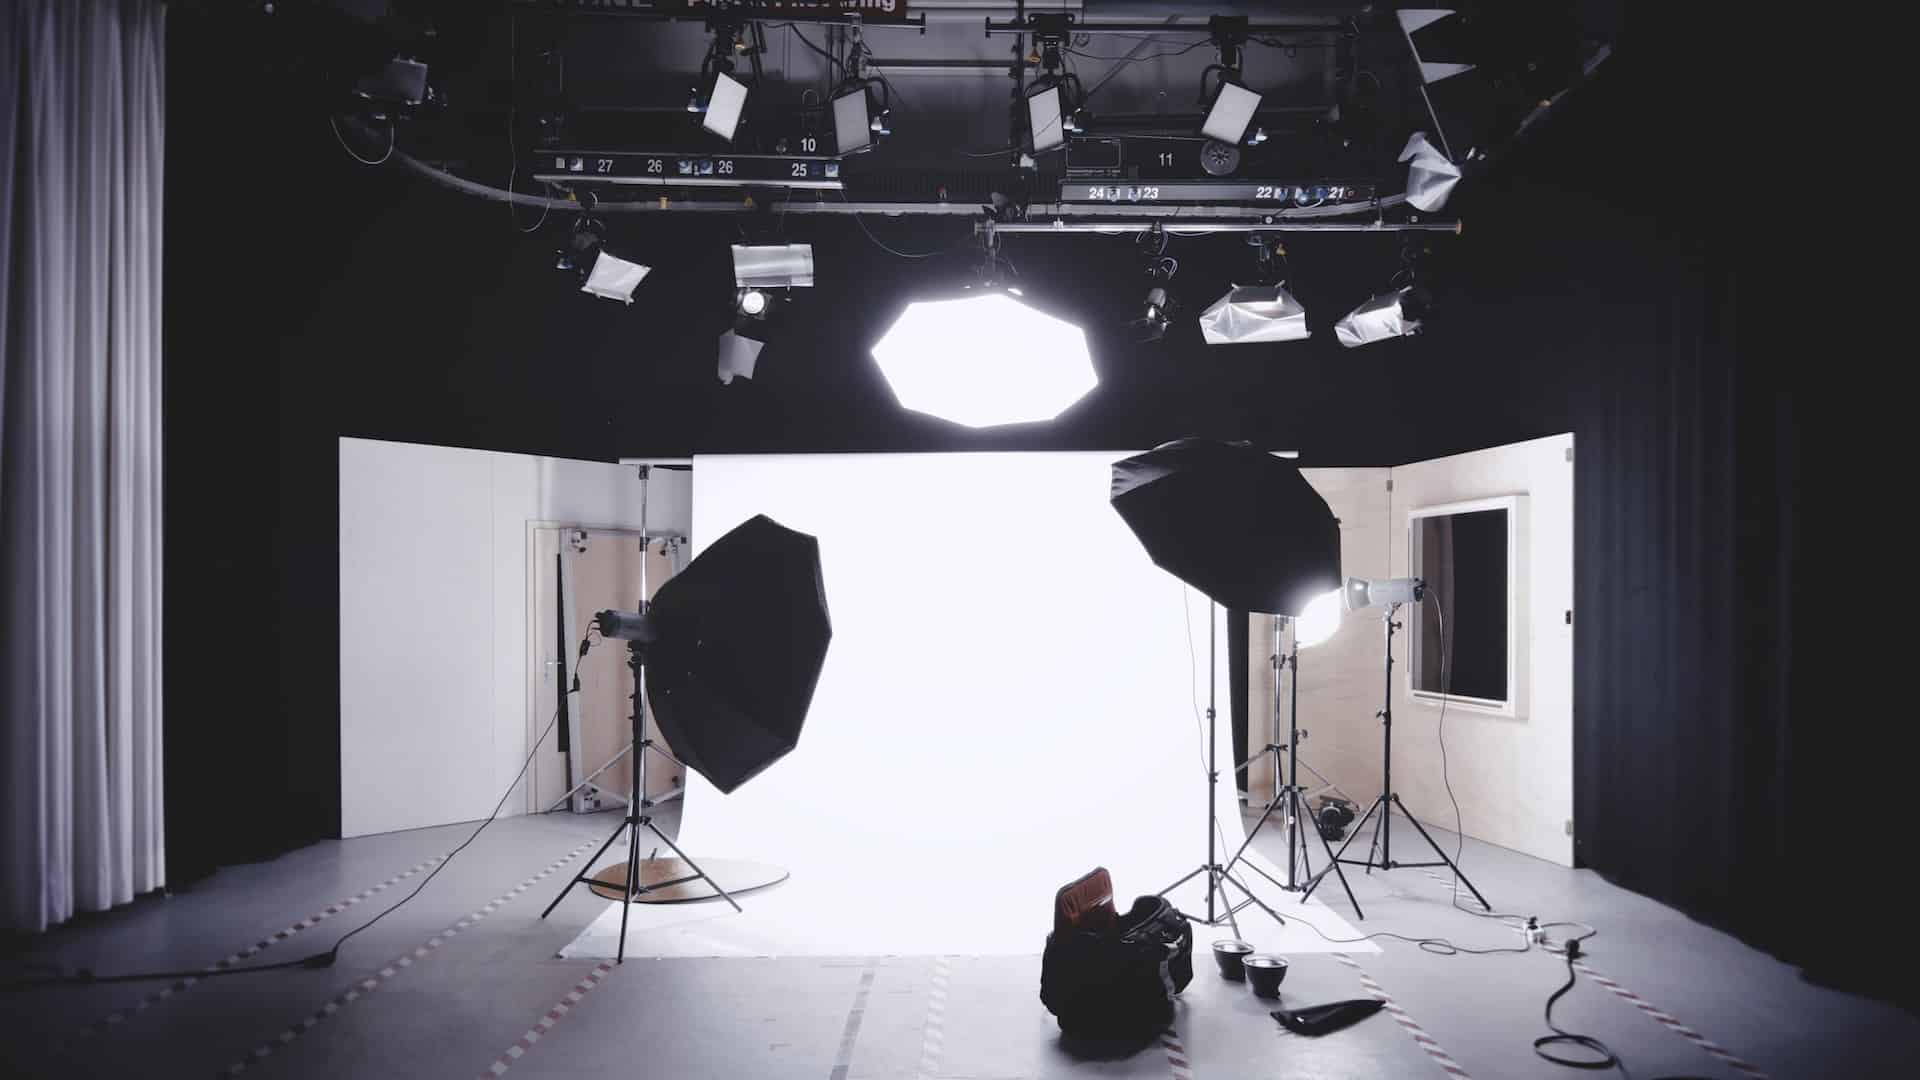 A photography set with lighting and umbrellas